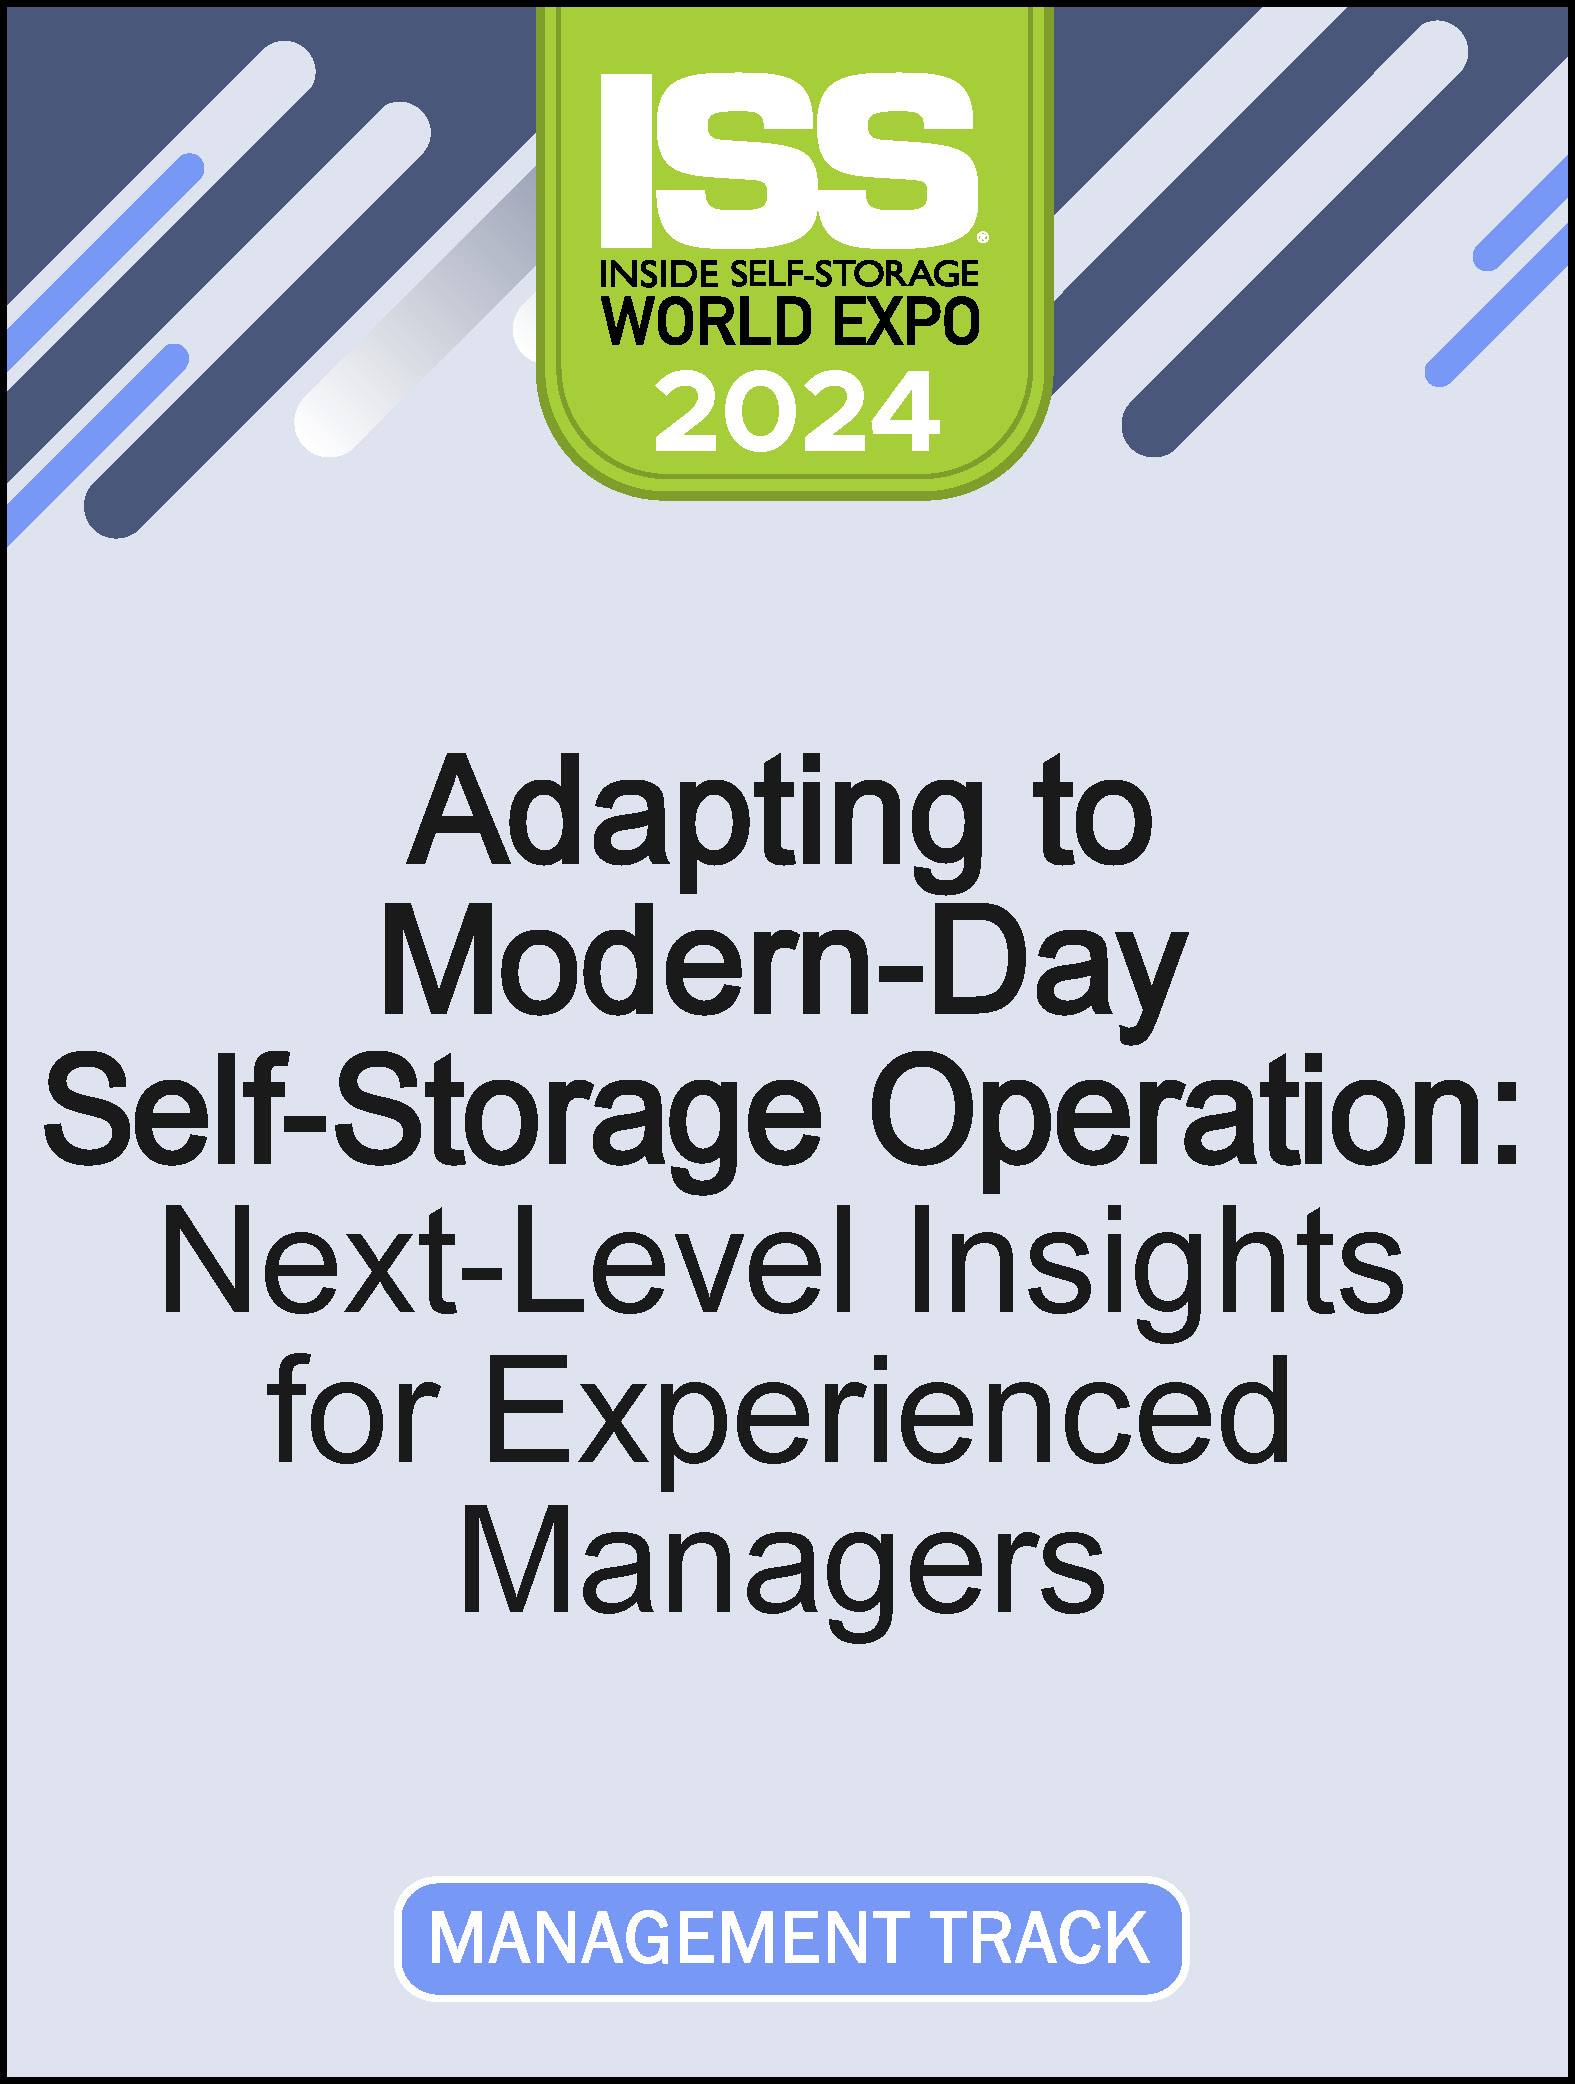 Video Pre-Order - Adapting to Modern-Day Self-Storage Operation: Next-Level Insights for Experienced Managers